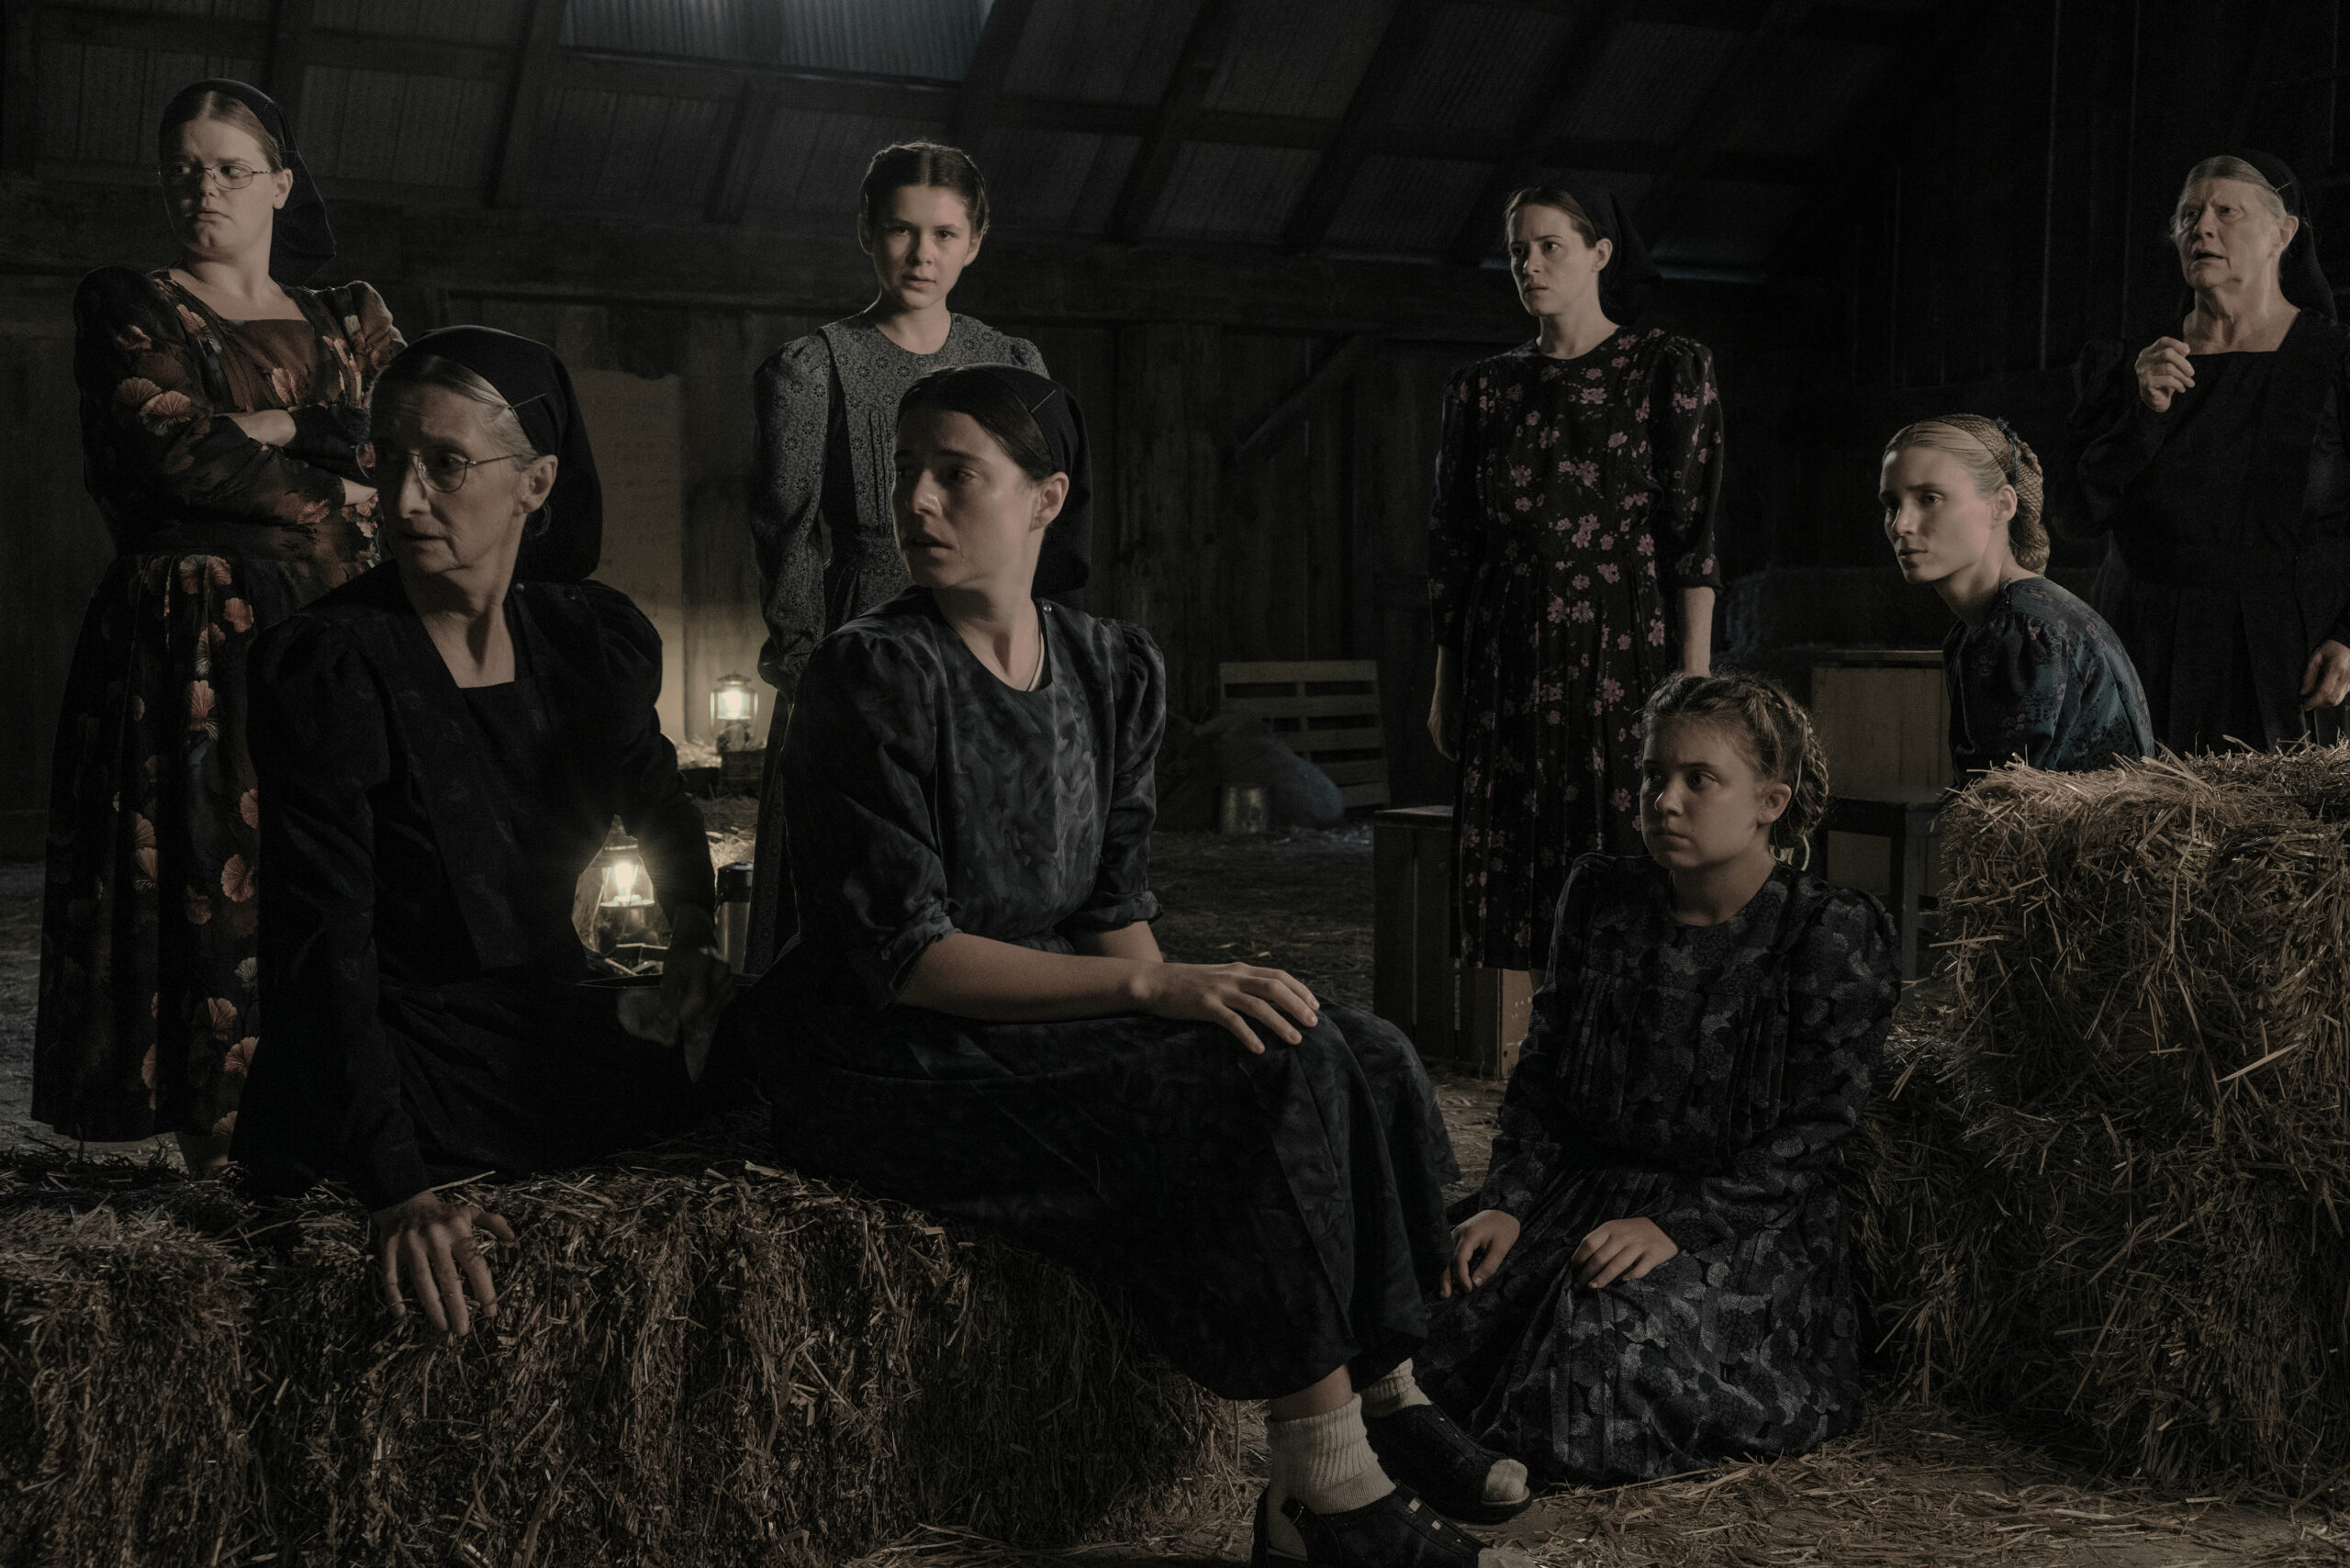 Michelle McLeod stars as Mejal, Sheila McCarthy as Greta, Liv McNeil as Neitje, Jessie Buckley as Mariche, Claire Foy as Salome, Kate Hallett as Autje, Rooney Mara as Ona and Judith Ivey as Agata